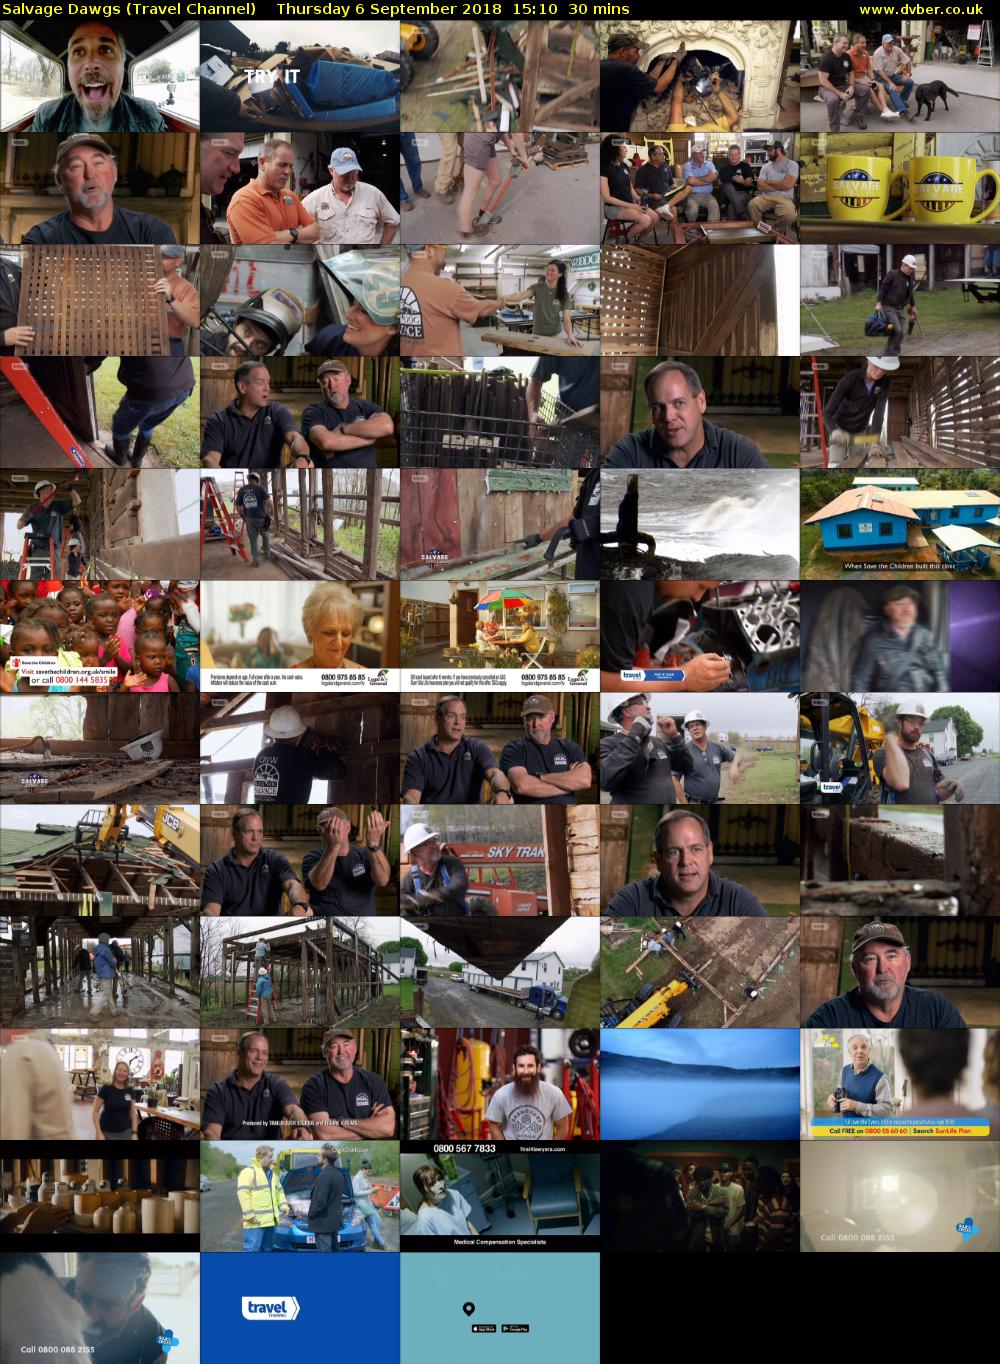 Salvage Dawgs (Travel Channel) Thursday 6 September 2018 15:10 - 15:40